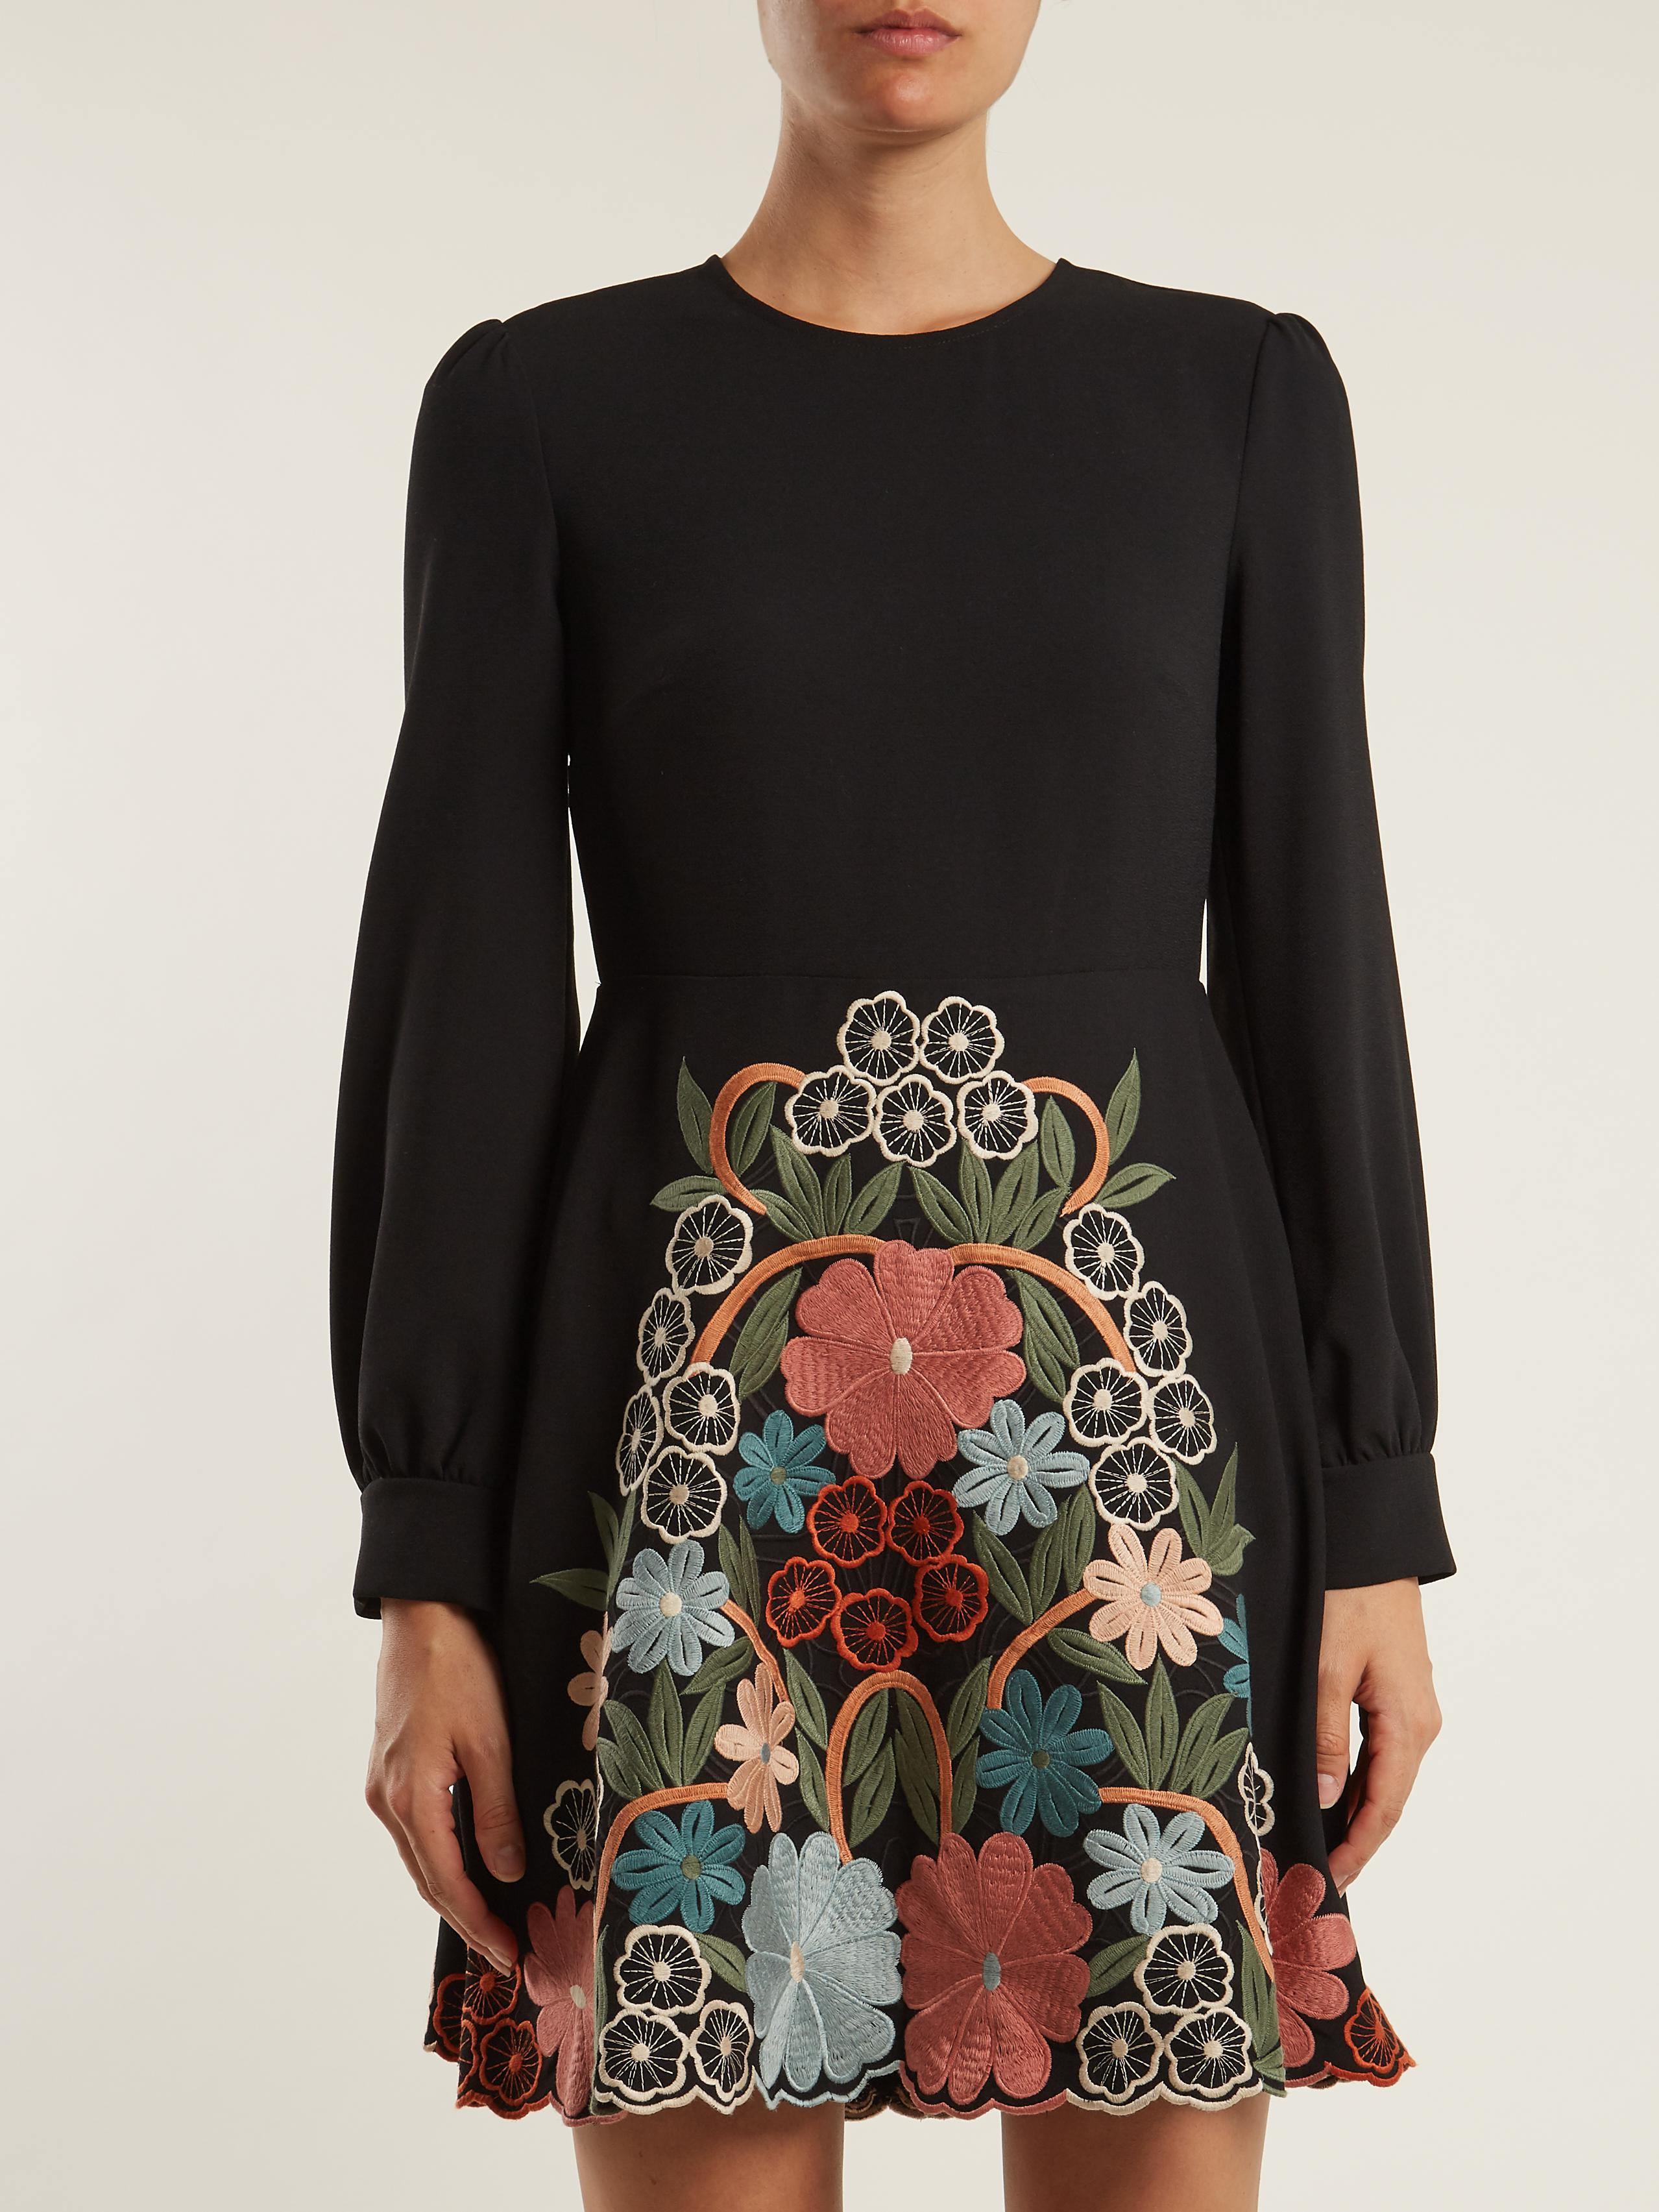 interior bomb chief RED Valentino Floral Macramé-embroidered Crepe Dress in Black | Lyst